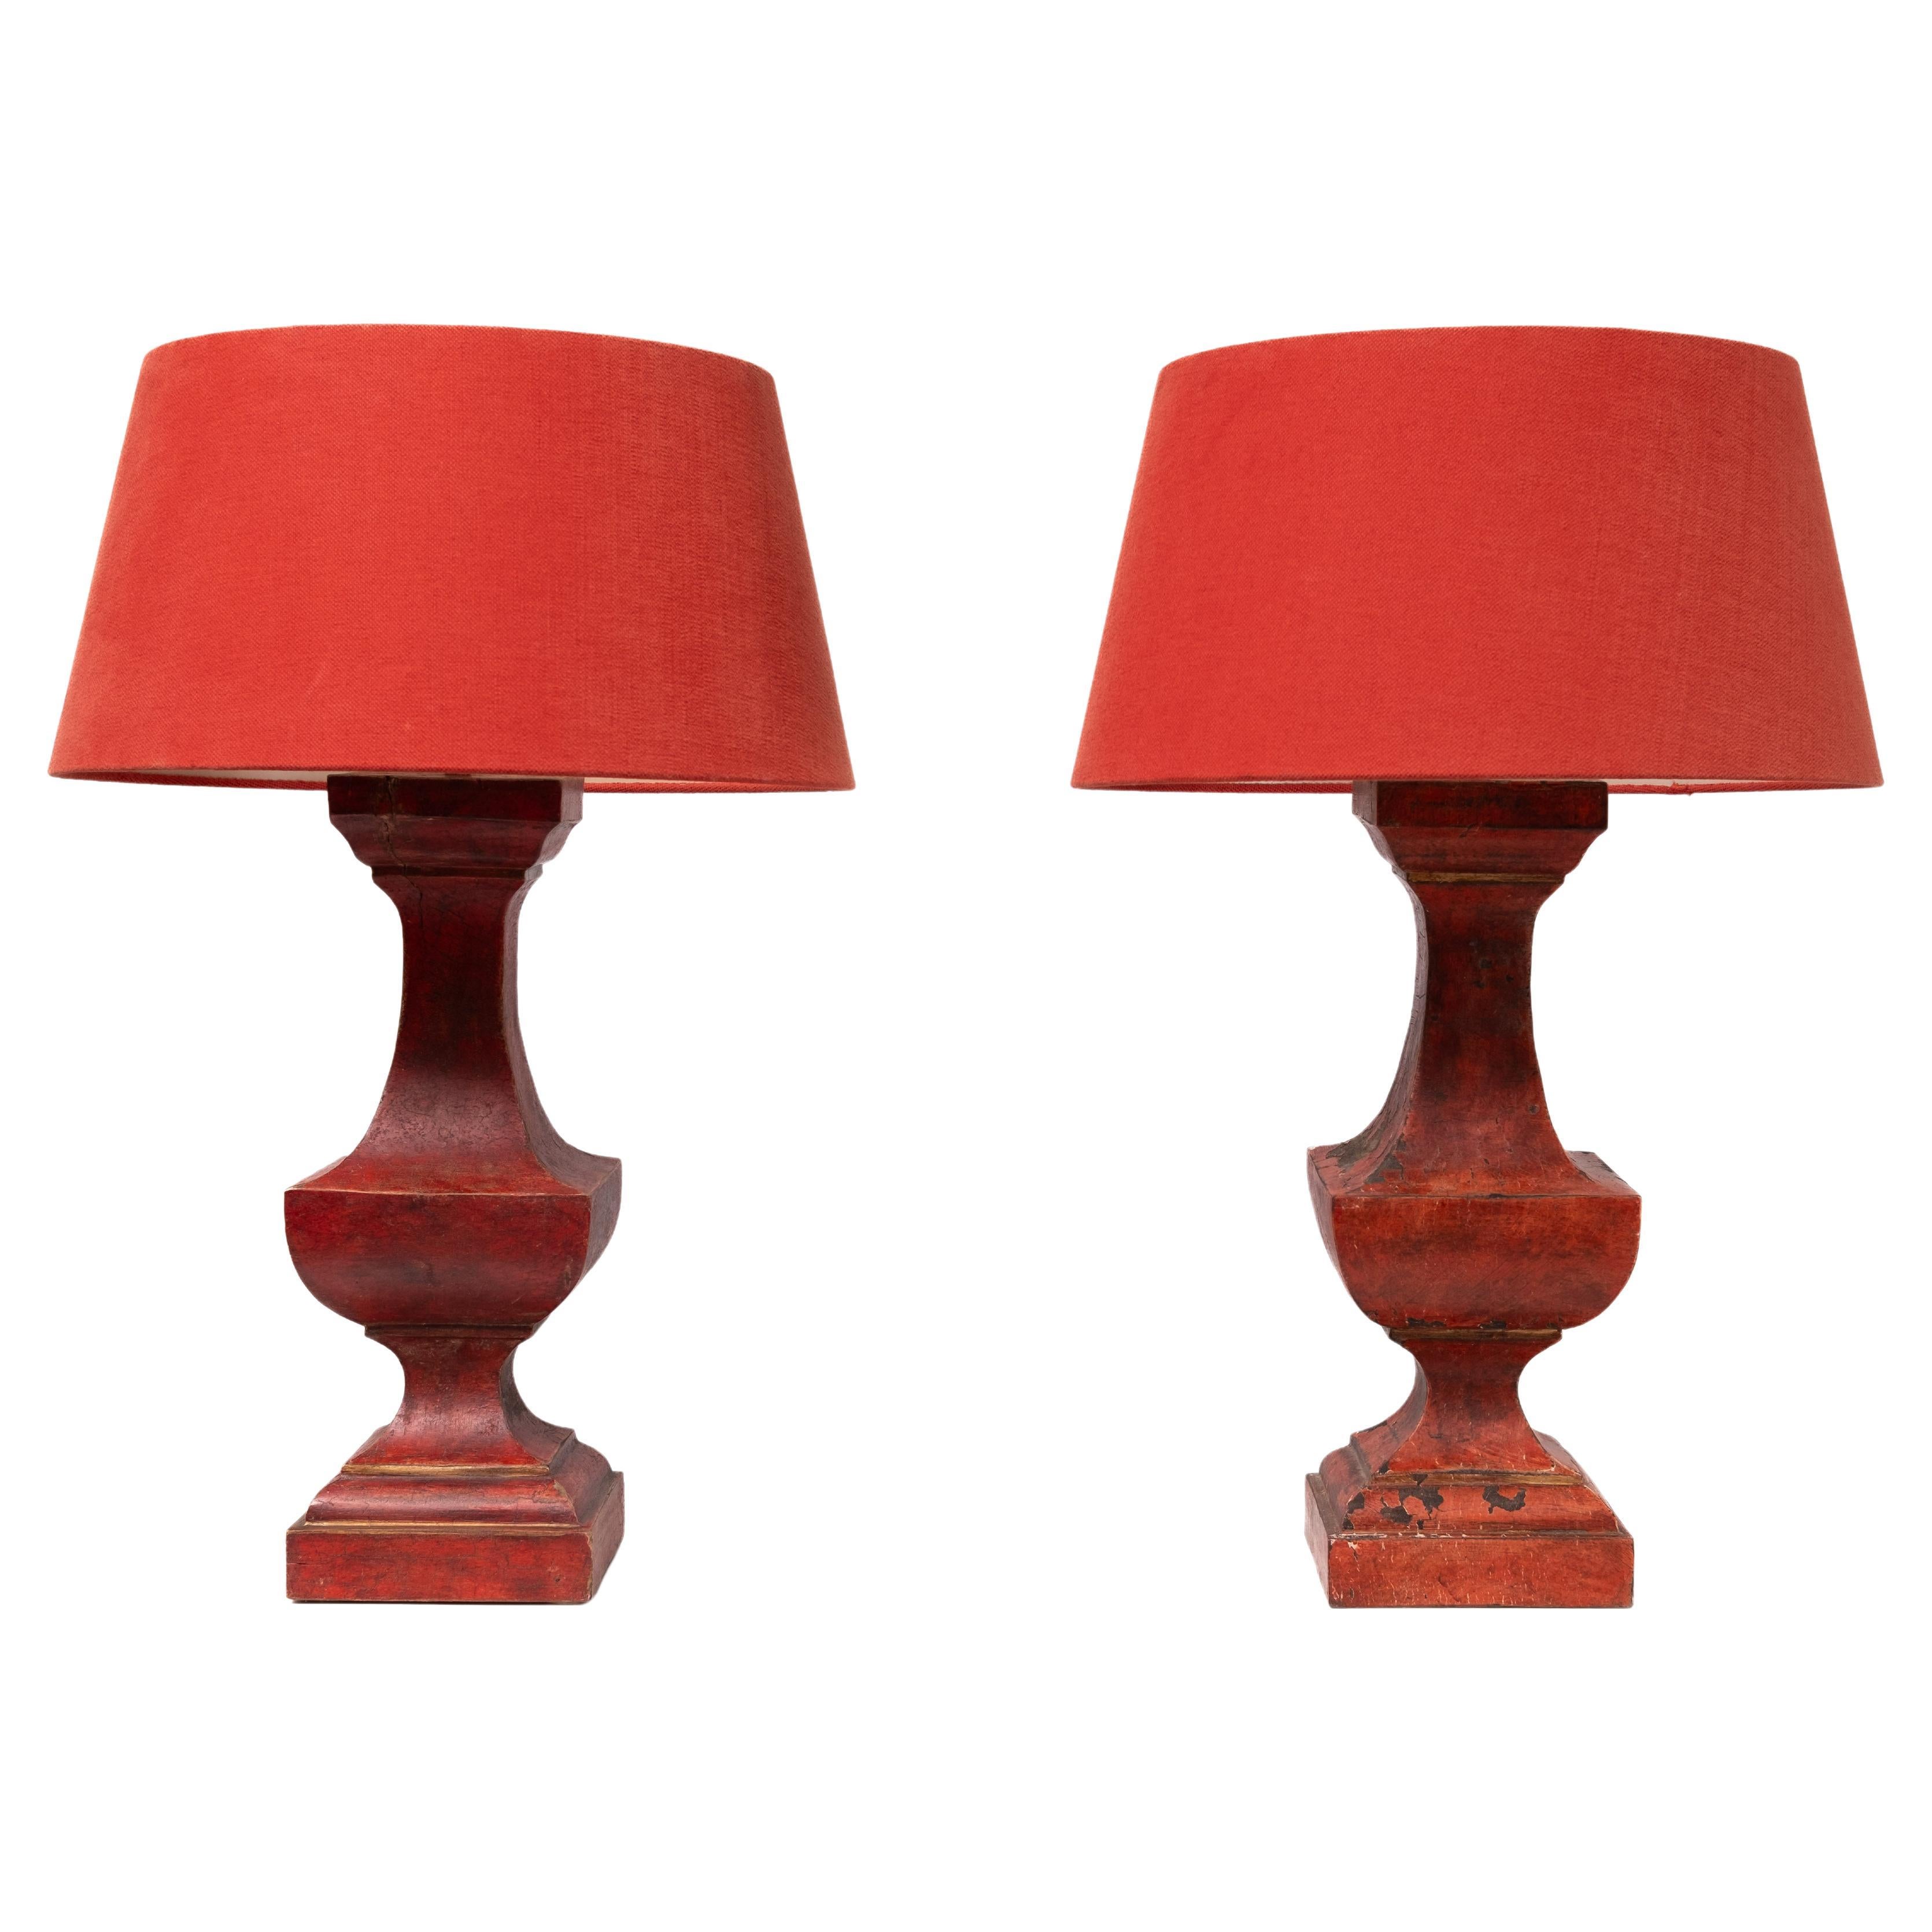 pair French red gesso timber table lamps with red shade.